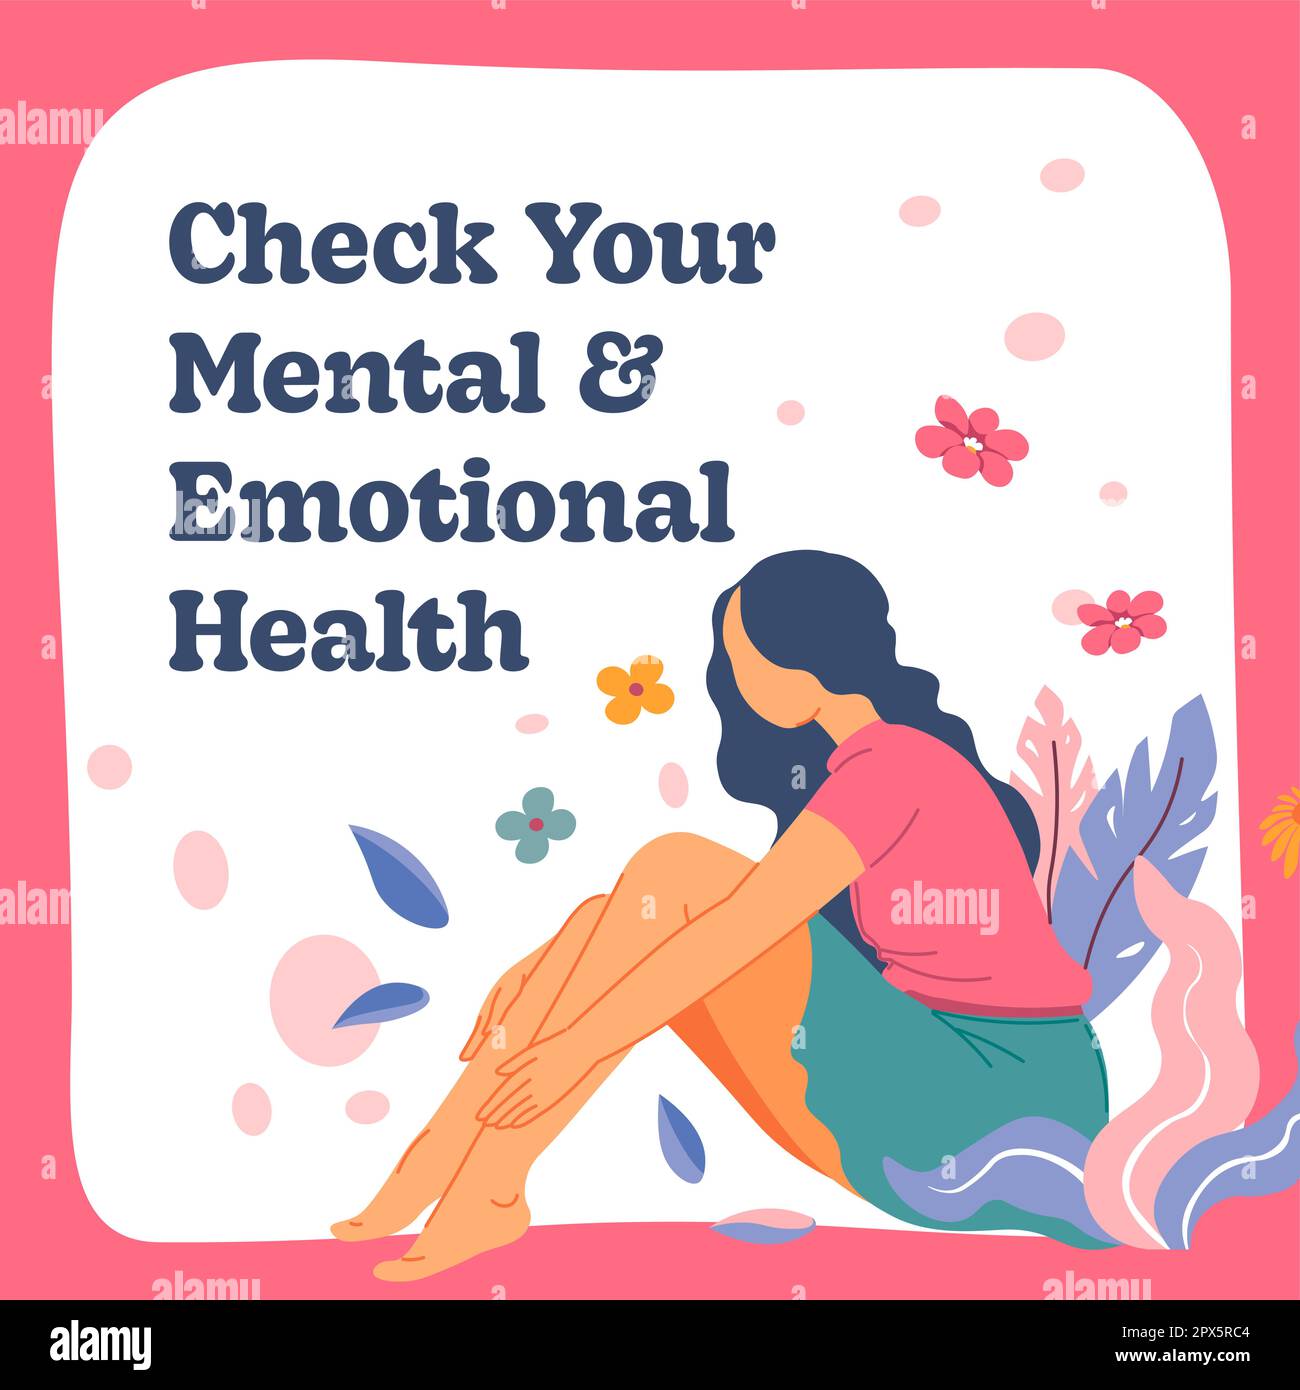 Check your mental and emotional health banner Stock Vector